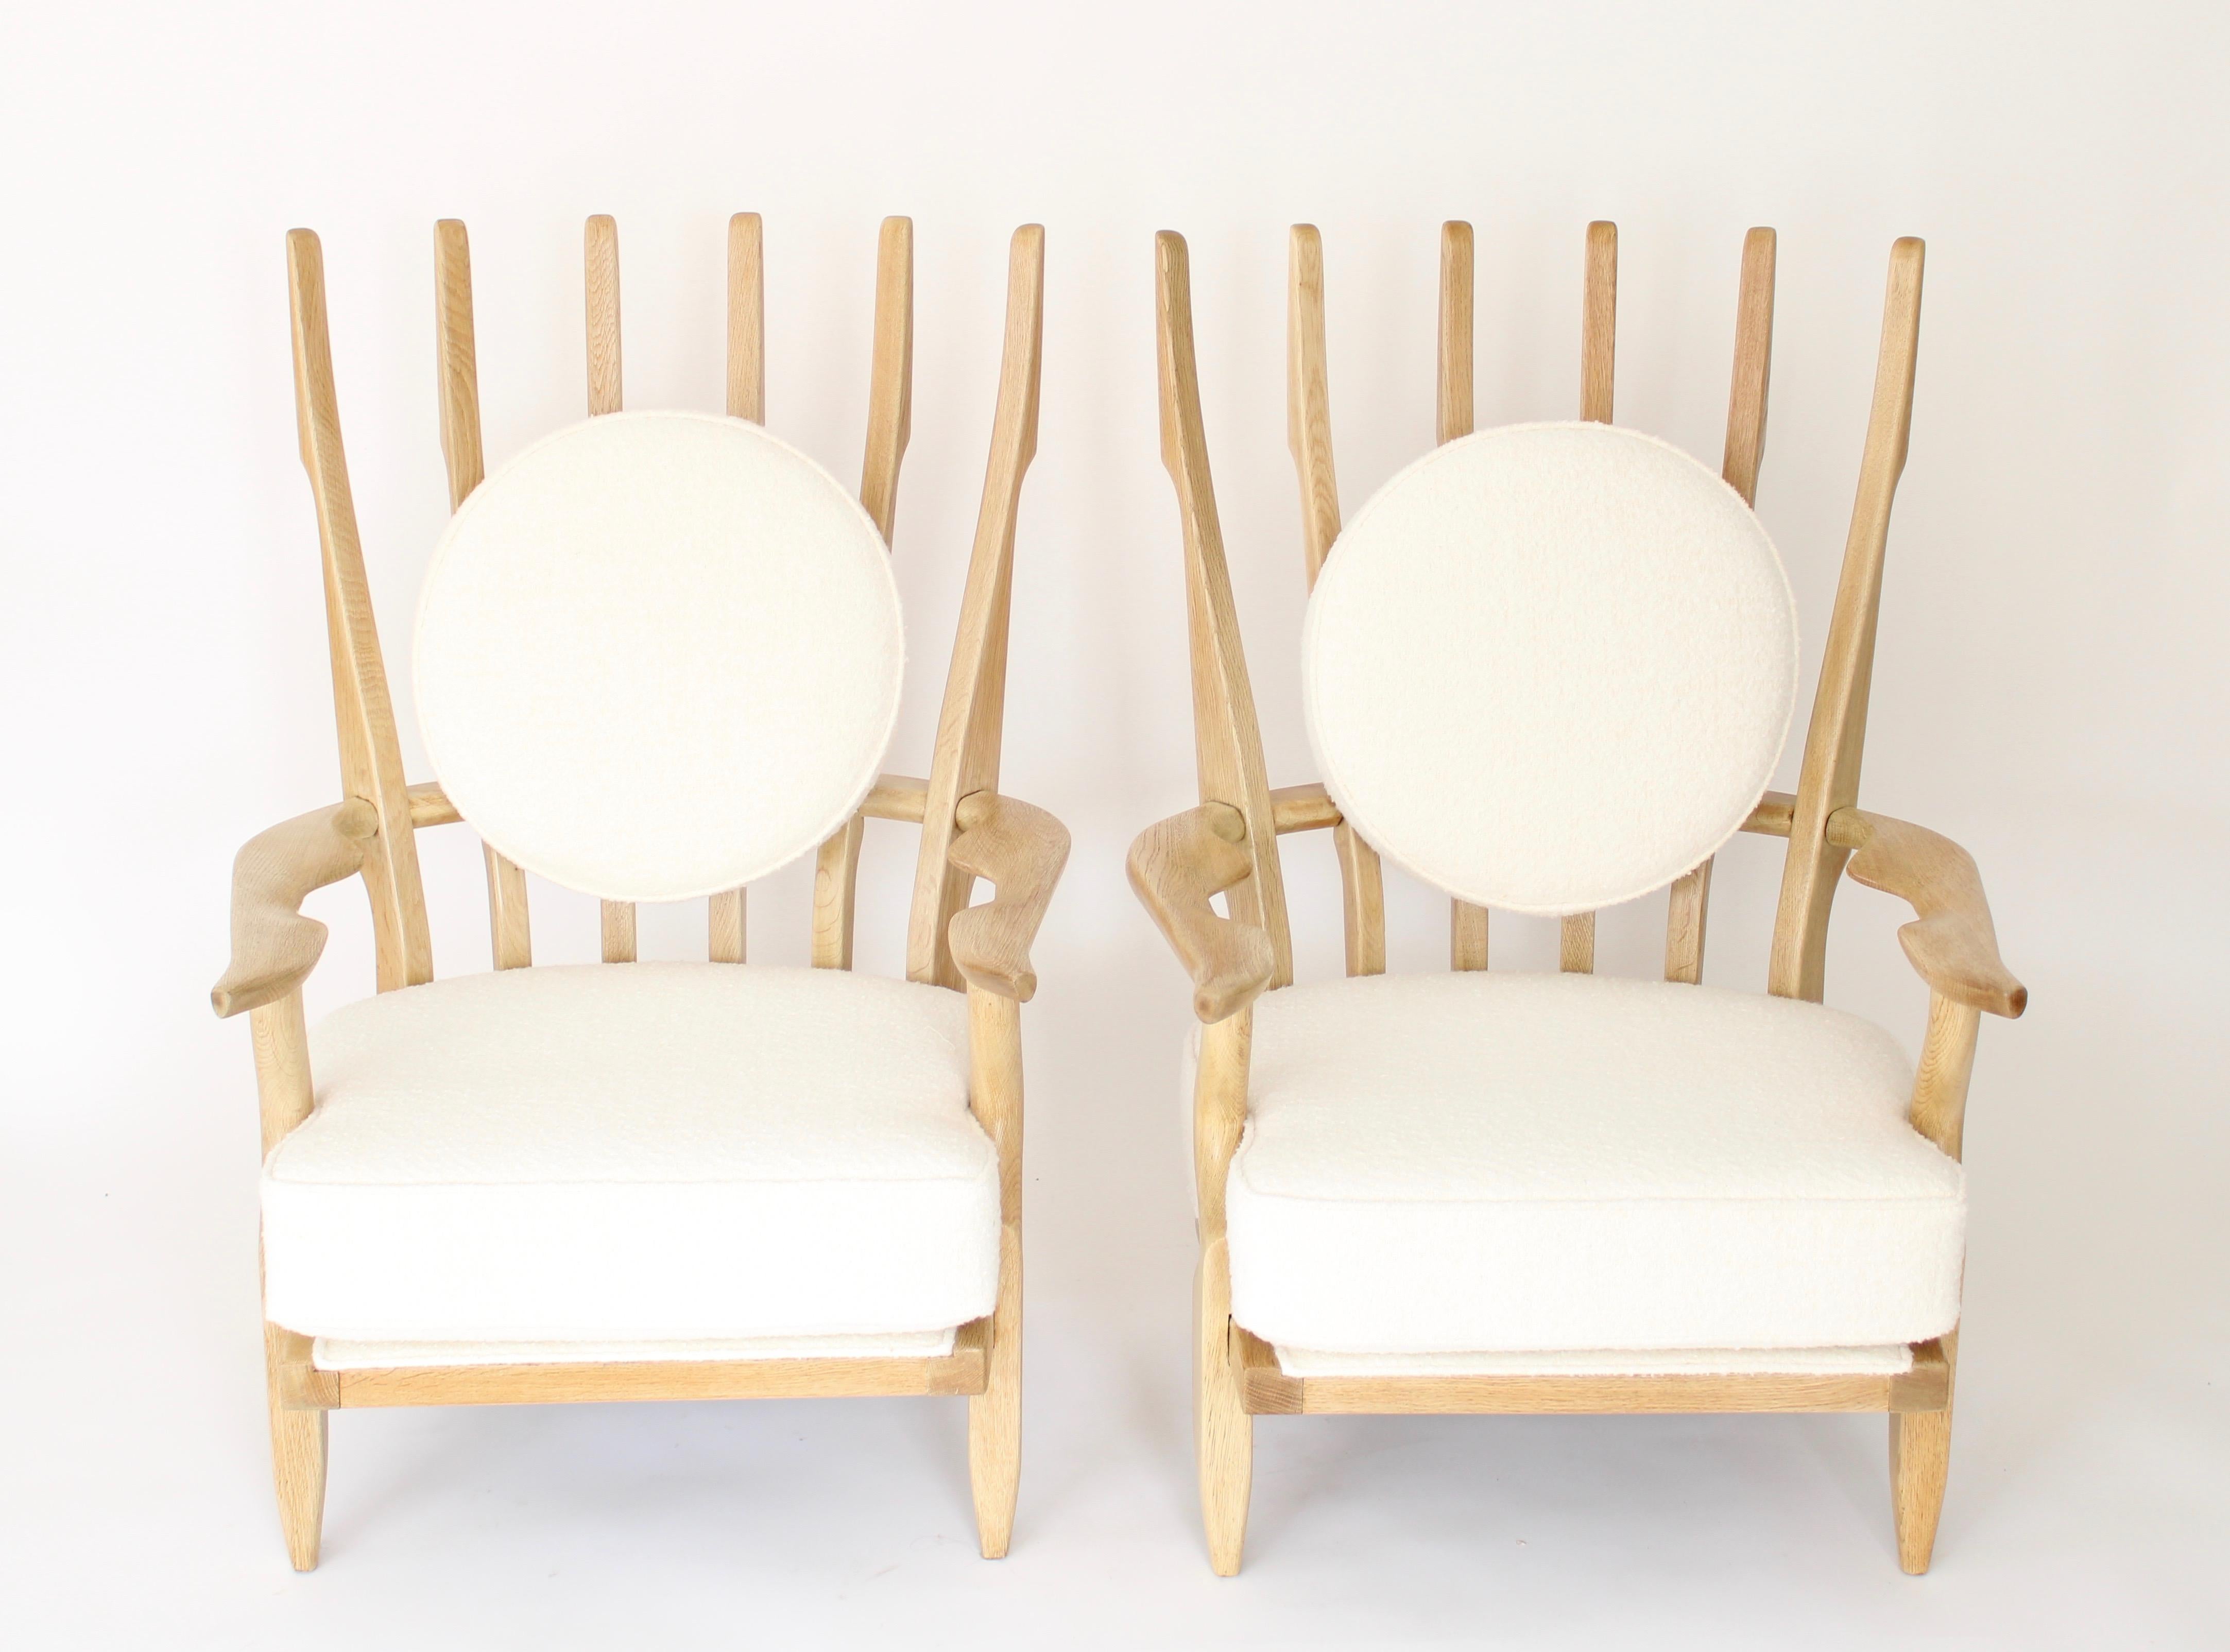 Gullerme et Chambron or Guillerme and Chambron pair of extraordinary French vintage circa 1950 high back lounge chairs in solid bleached oak with the typical characteristic long finger motif at the backs for Votre Maison. This pair of the 